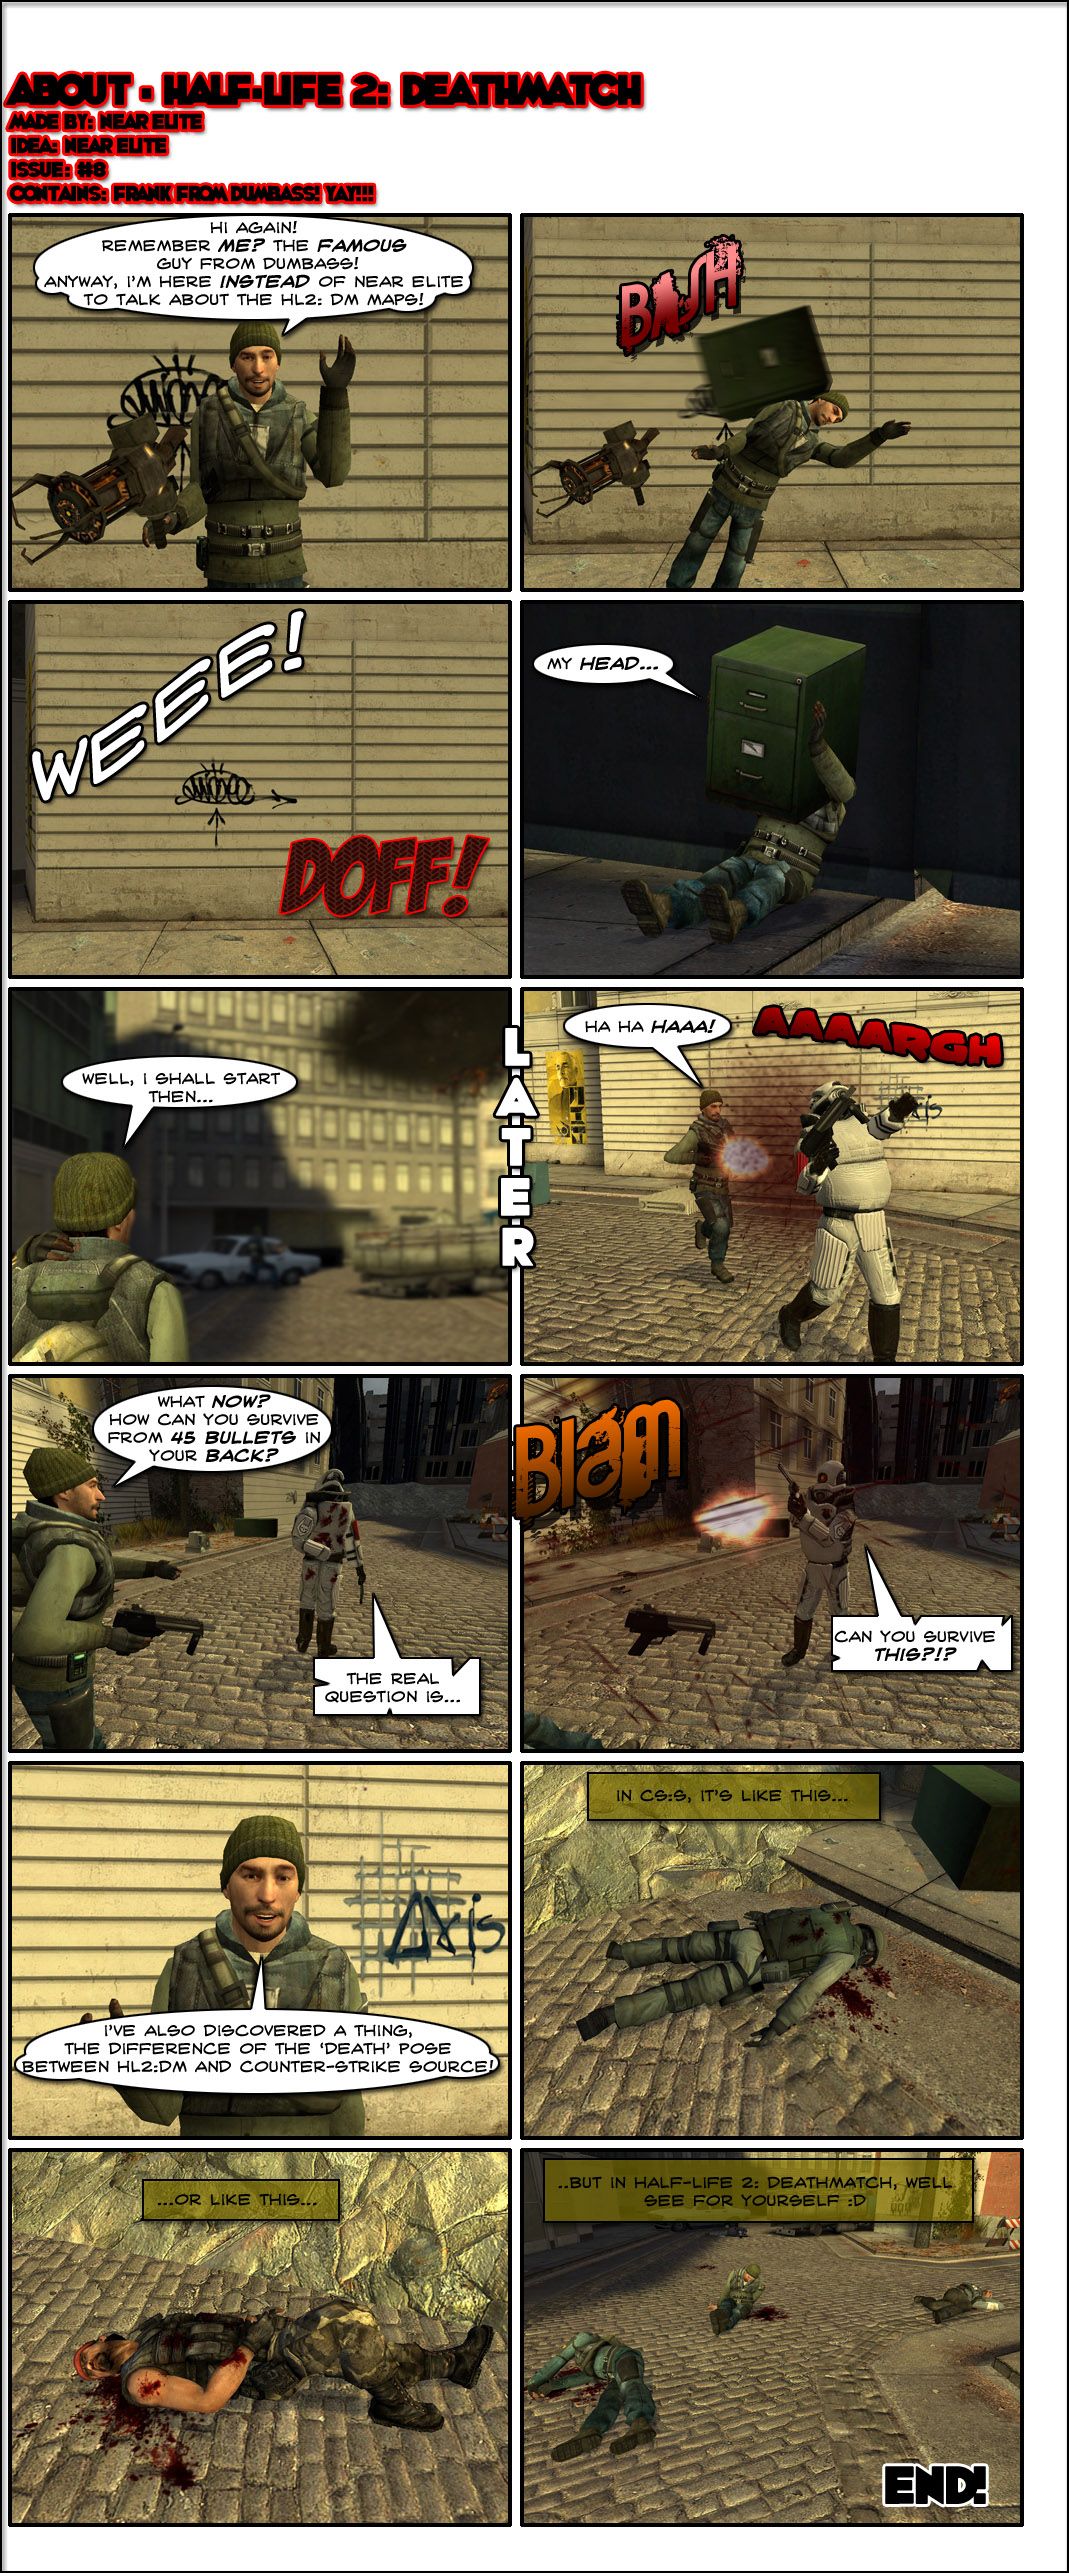 A man in a rebel outfit from Half-Life 2 greets the reader and asks if they remember him. He introduces himself as the famous guy from Dumbass and says he's here instead of Near Elite to talk about Half-Life 2: Deathmatch maps. He then gets hit in the head by a flying file cabinet and is thrown at a wall, the file cabinet getting stuck in his head. Later, the guy comes across a Combine elite soldier and shoots him in the back, but is then shocked to realize that he's still standing after 45 bullets in his back. The elite then turns and says the real question is if the guy from Dumbass can survive this, then shoots him once with a Magnum revolver. The presenter then mentions he also discovered a thing, the difference of the death pose between Half-Life 2: Deathmatch and Counter-Strike: Source. He presents two dead bodies from Counter-Strike, who are laying on the ground normally. Afterwards, he shows the corpses in Half-Life 2: Deathmatch. One is lying awkwardly to his side, another is somehow sitting down after dying and a third is essentially cross-legged. The end.